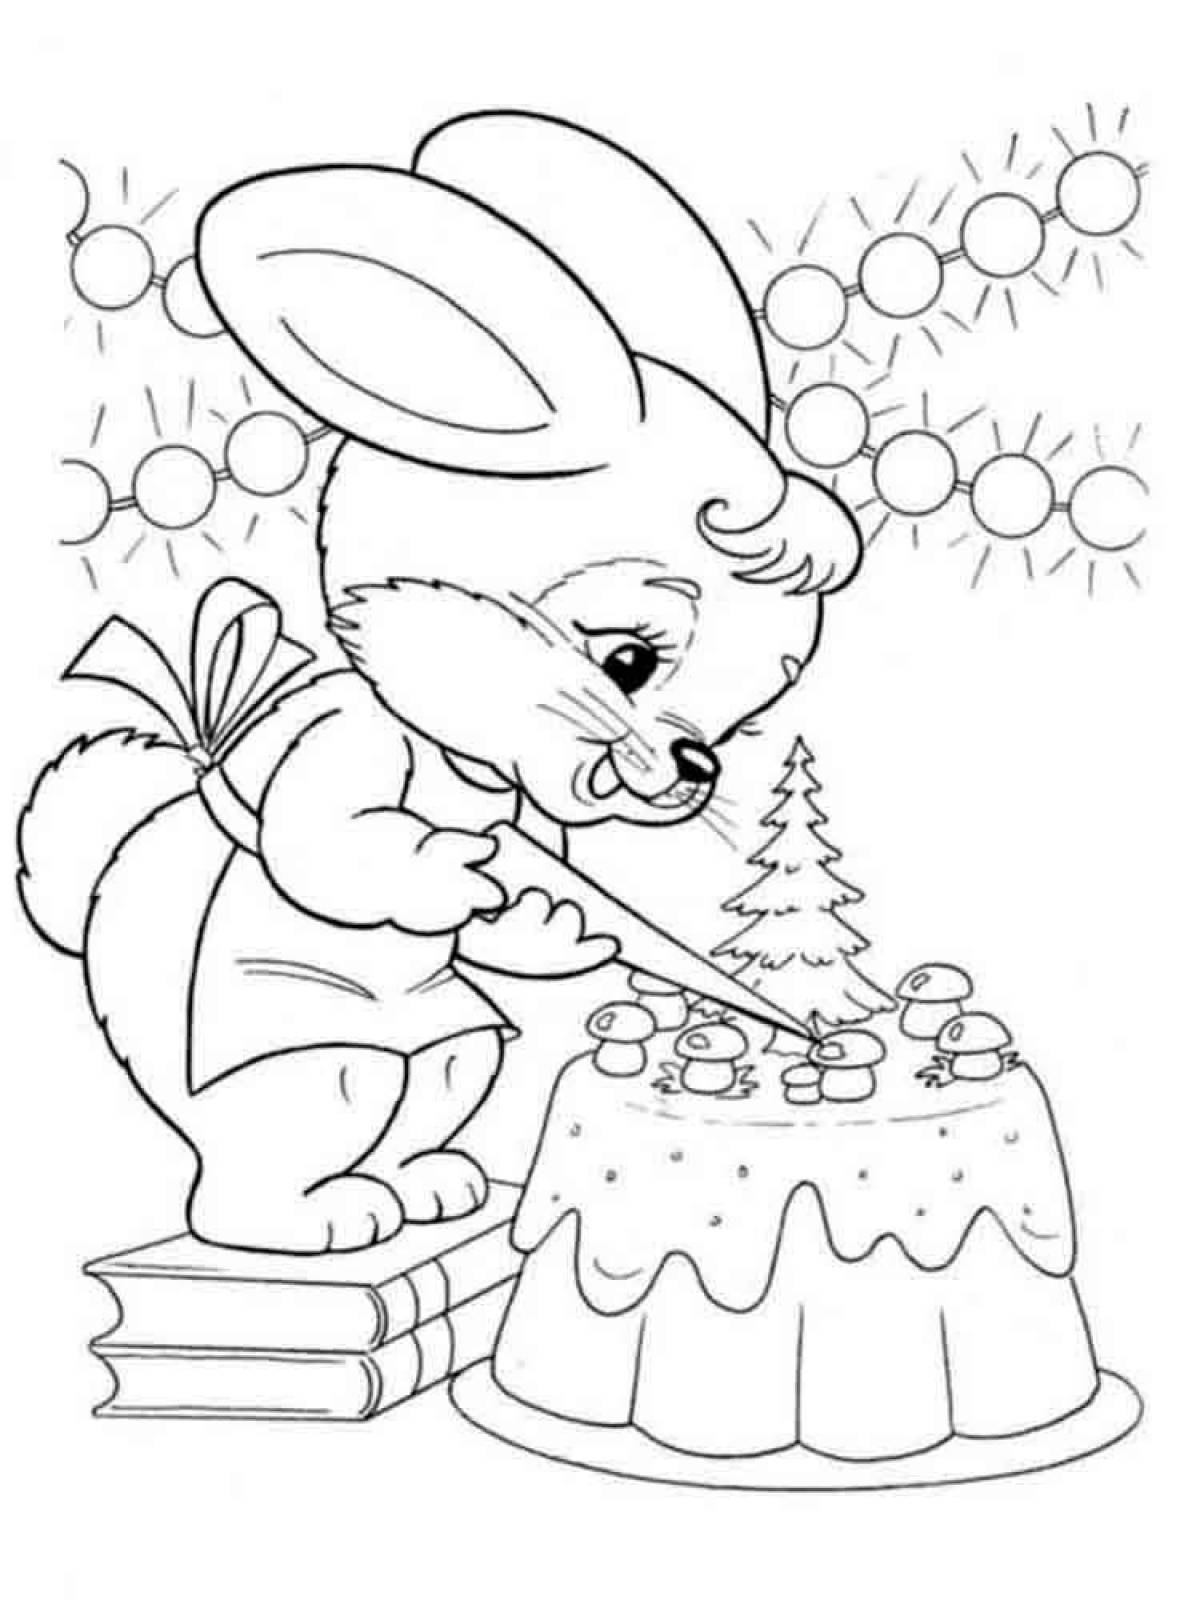 Coloring bright New Year's hare